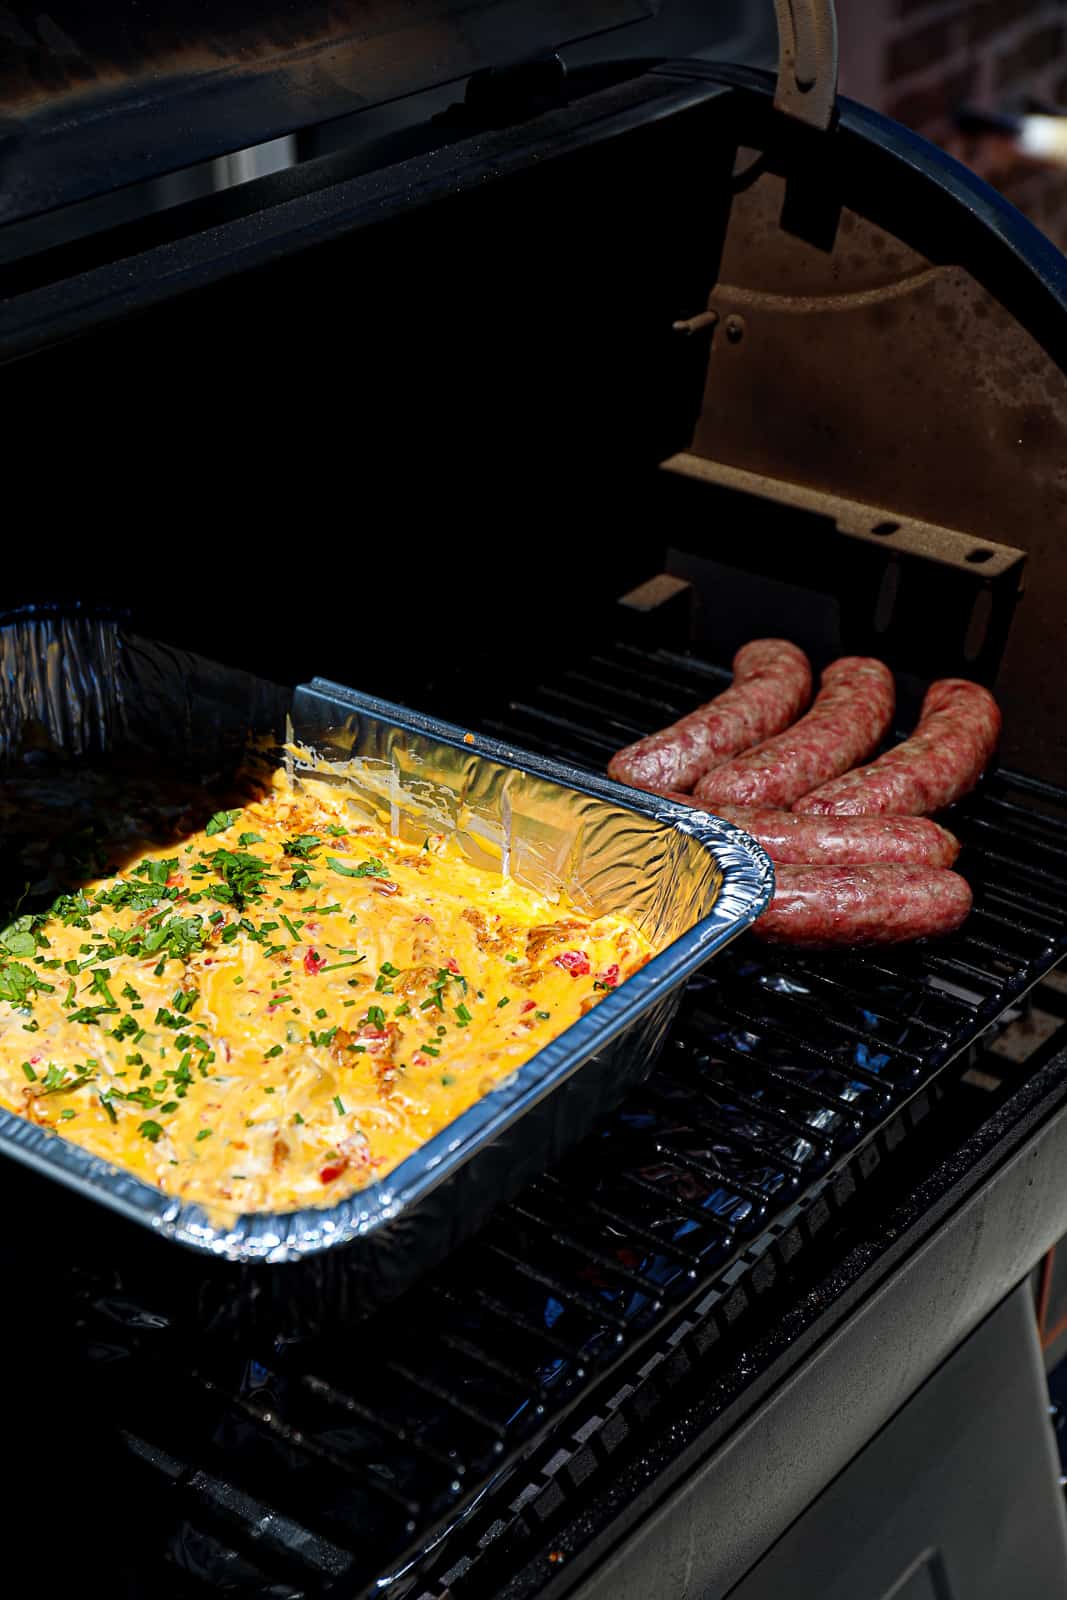 Smoked Queso With Sausage Smoking at the same time on the Traeger at 250